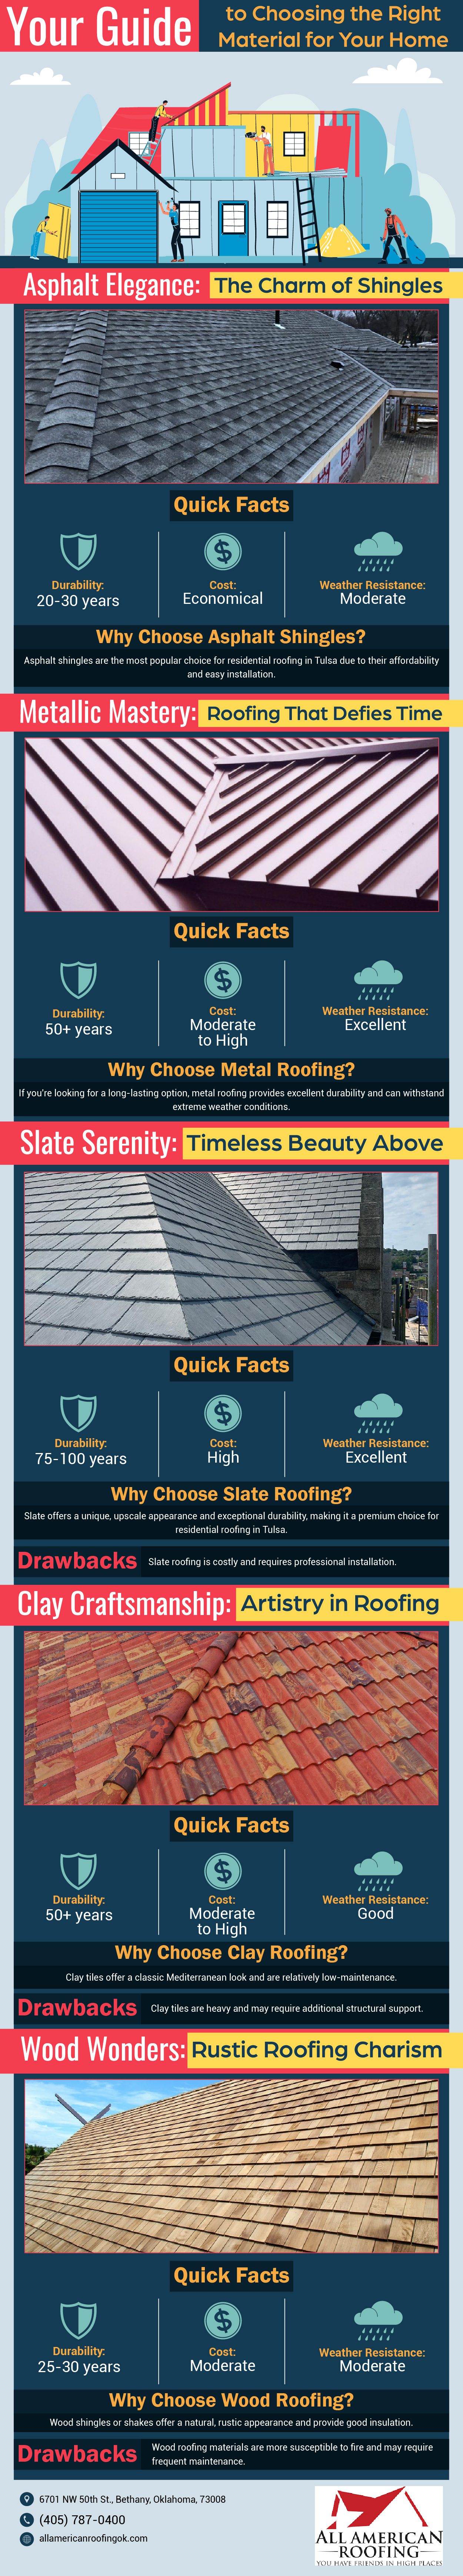 Infographic on residential roofing types and their benefits from All american roofing.